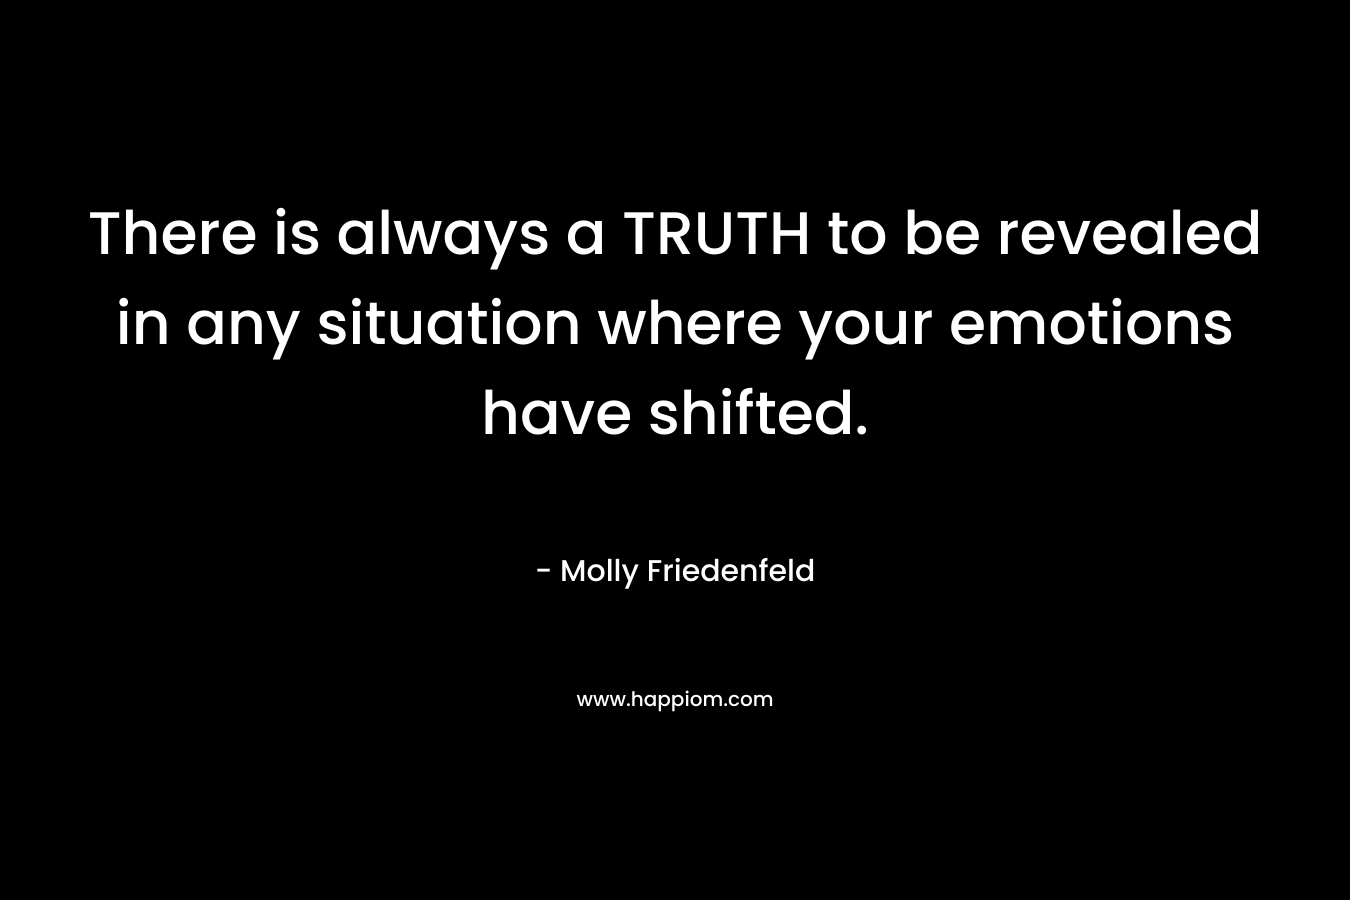 There is always a TRUTH to be revealed in any situation where your emotions have shifted. – Molly Friedenfeld